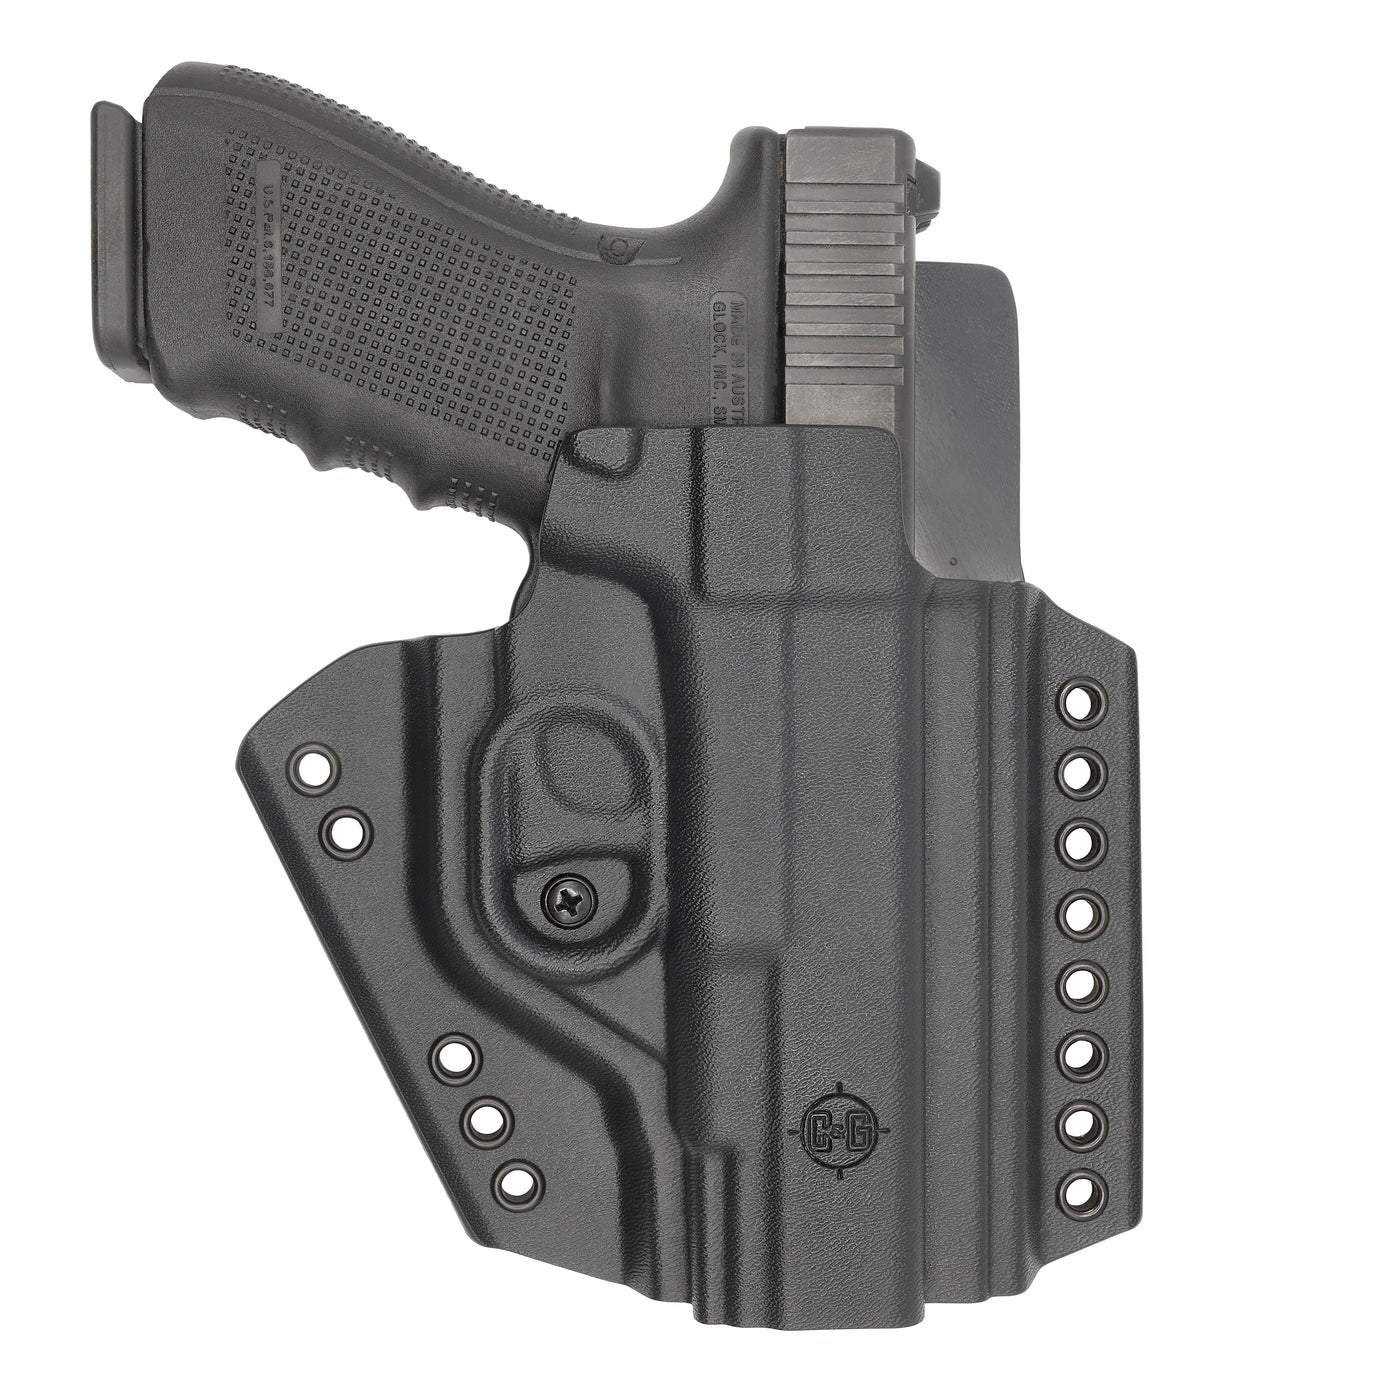 C&G Holsters custom chest mounted system Glock 17/19 holstered